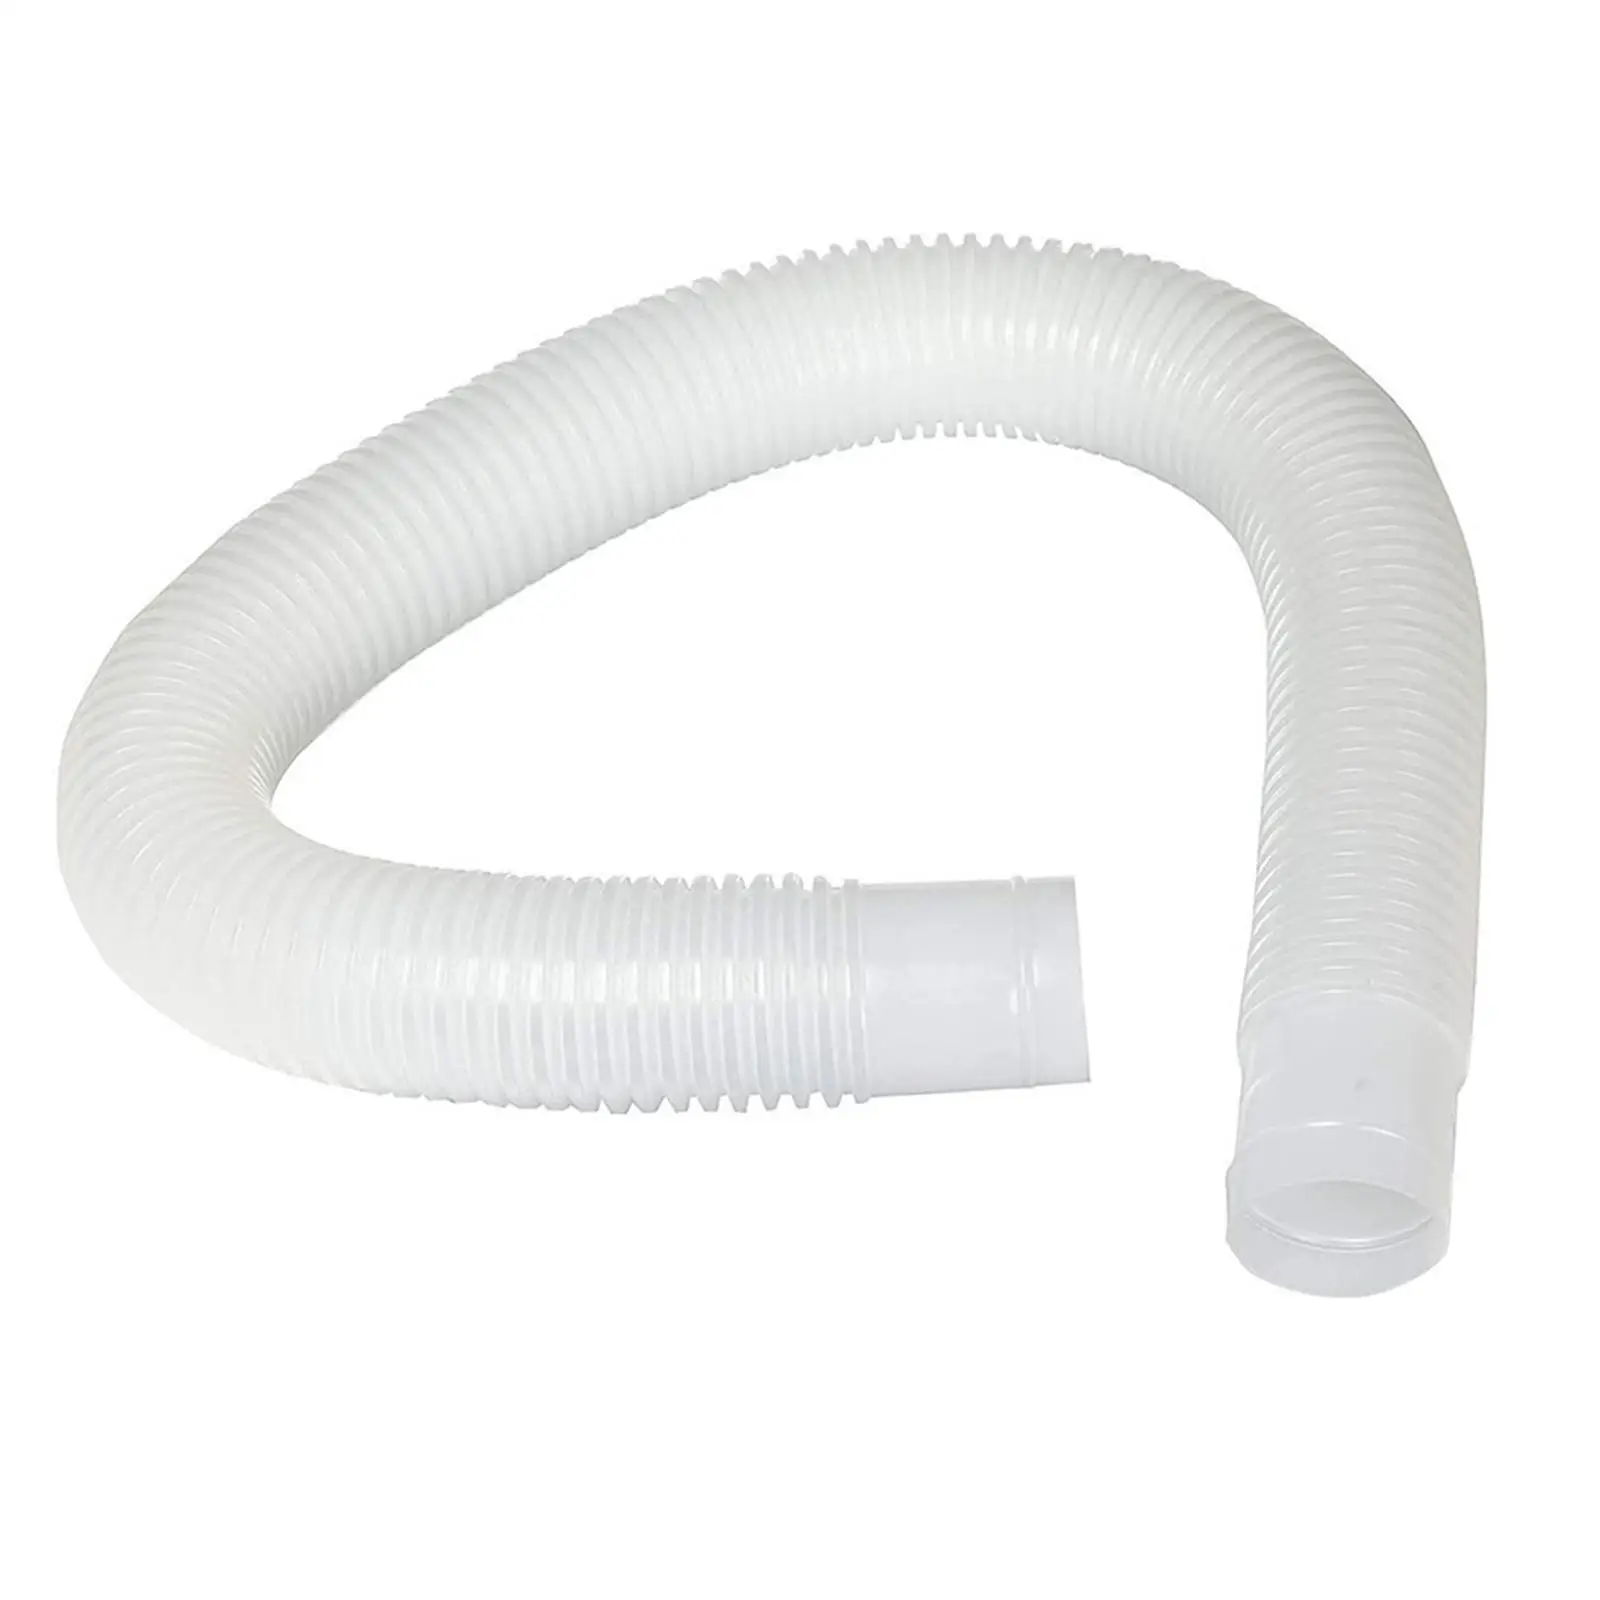 

Skimmer Replacement Hose Part Replaces Durable Pools Water Inlet Pipe Swimming Pool Skimmer Hose Strainer Replacement Hose